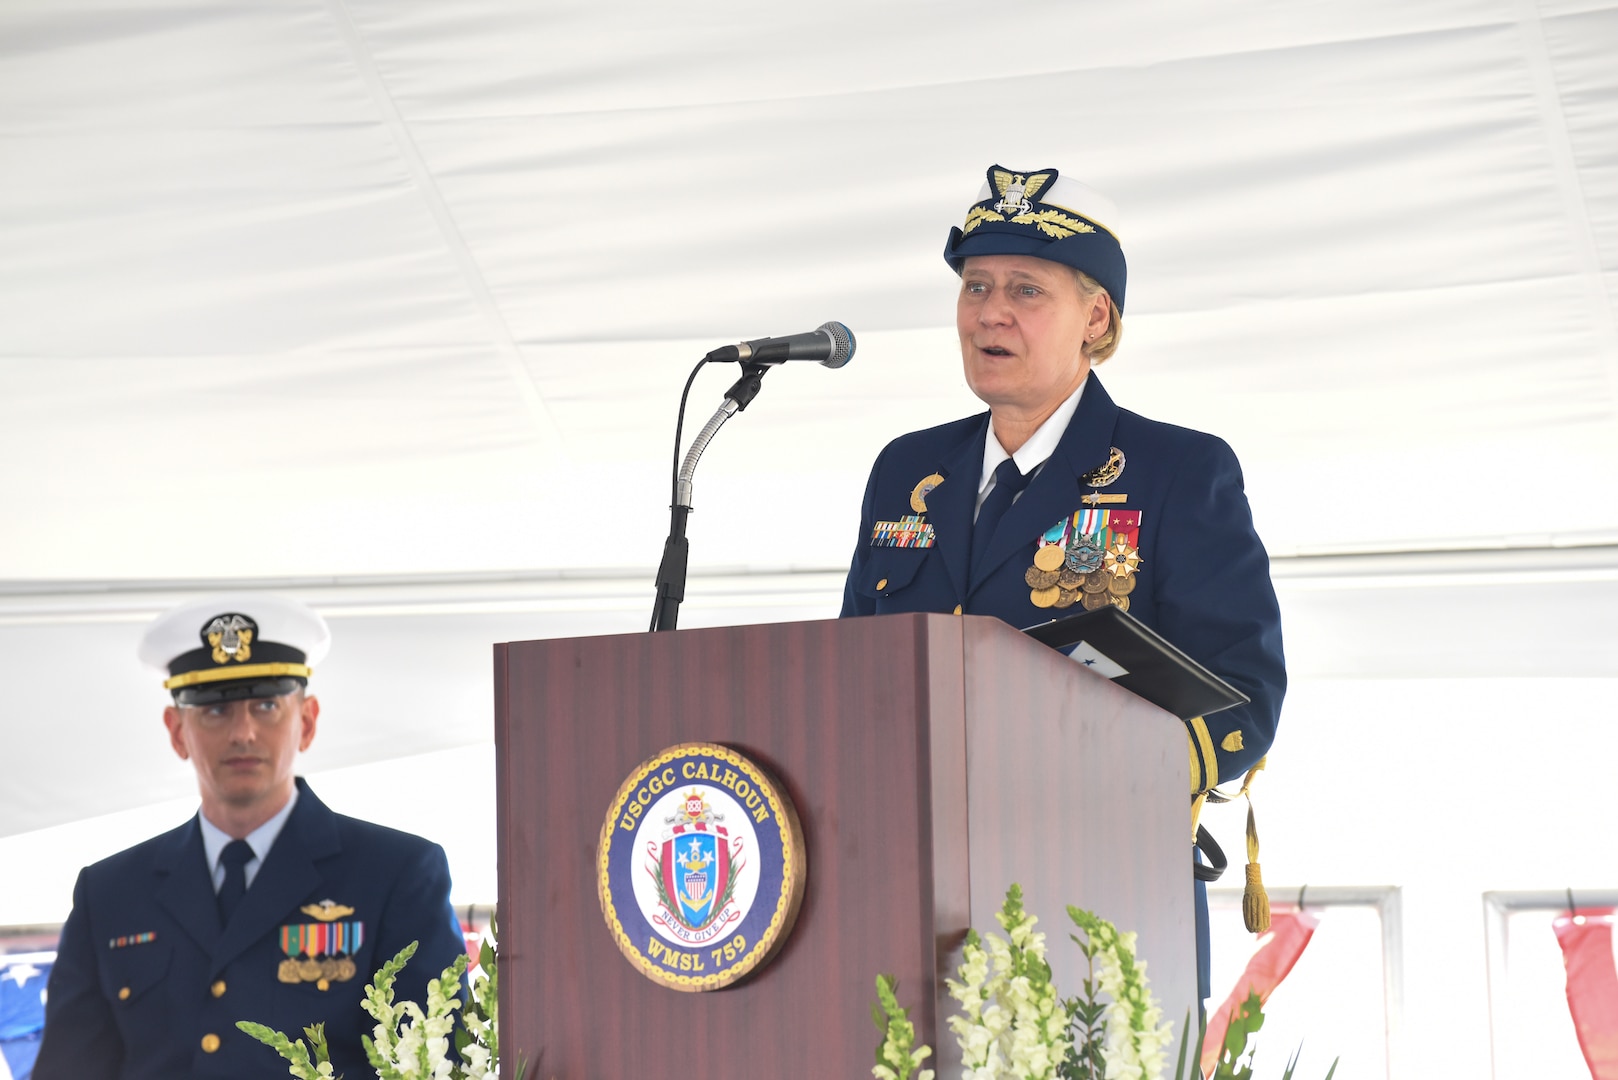 Coast Guard Commandant Adm. Linda Fagan delivers remarks during the commissioning ceremony of U.S. Coast Guard Cutter Calhoun (WMSL 759), April 20, in North Charleston, South Carolina. The Calhoun, which is named for the first Master Chief Petty Officer of the Coast Guard, Charles Calhoun, was commissioned into service as the 10th National Security Cutter. (U.S. Coast Guard photo by Petty Officer 2nd Class Brandon Hillard)